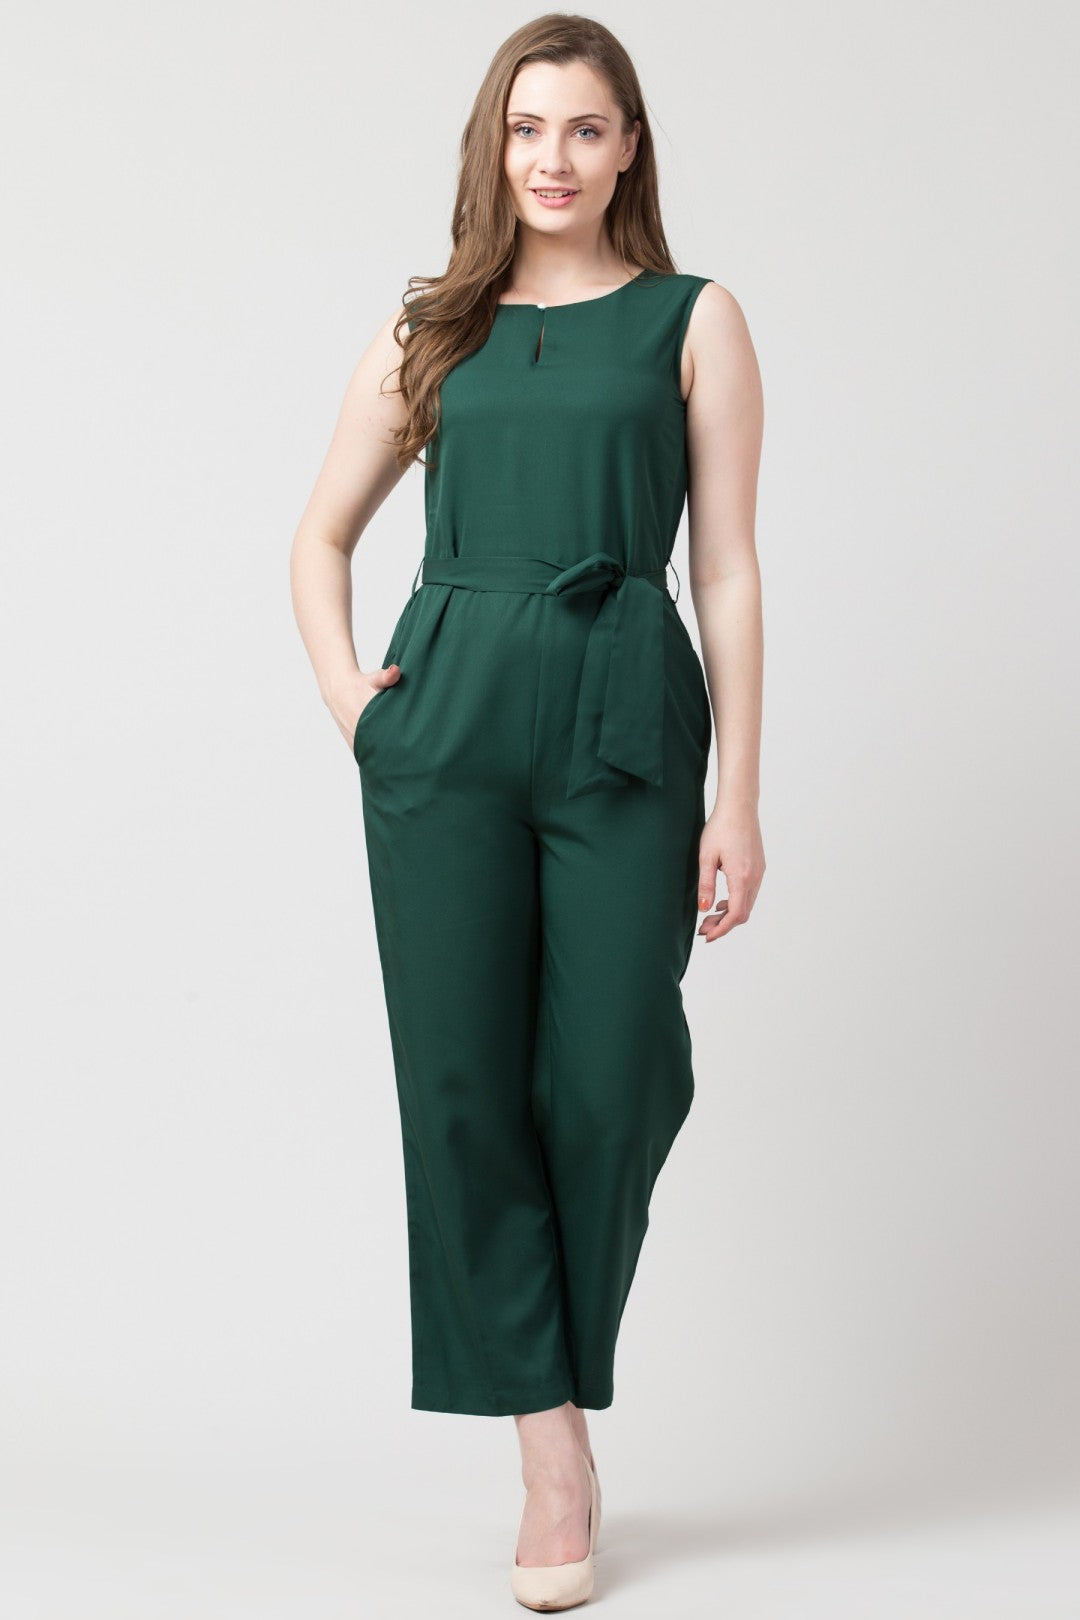 Amazing Round Neck Sleeveless Solid Pleated Regular Jumpsuits For Women & Girls⭐